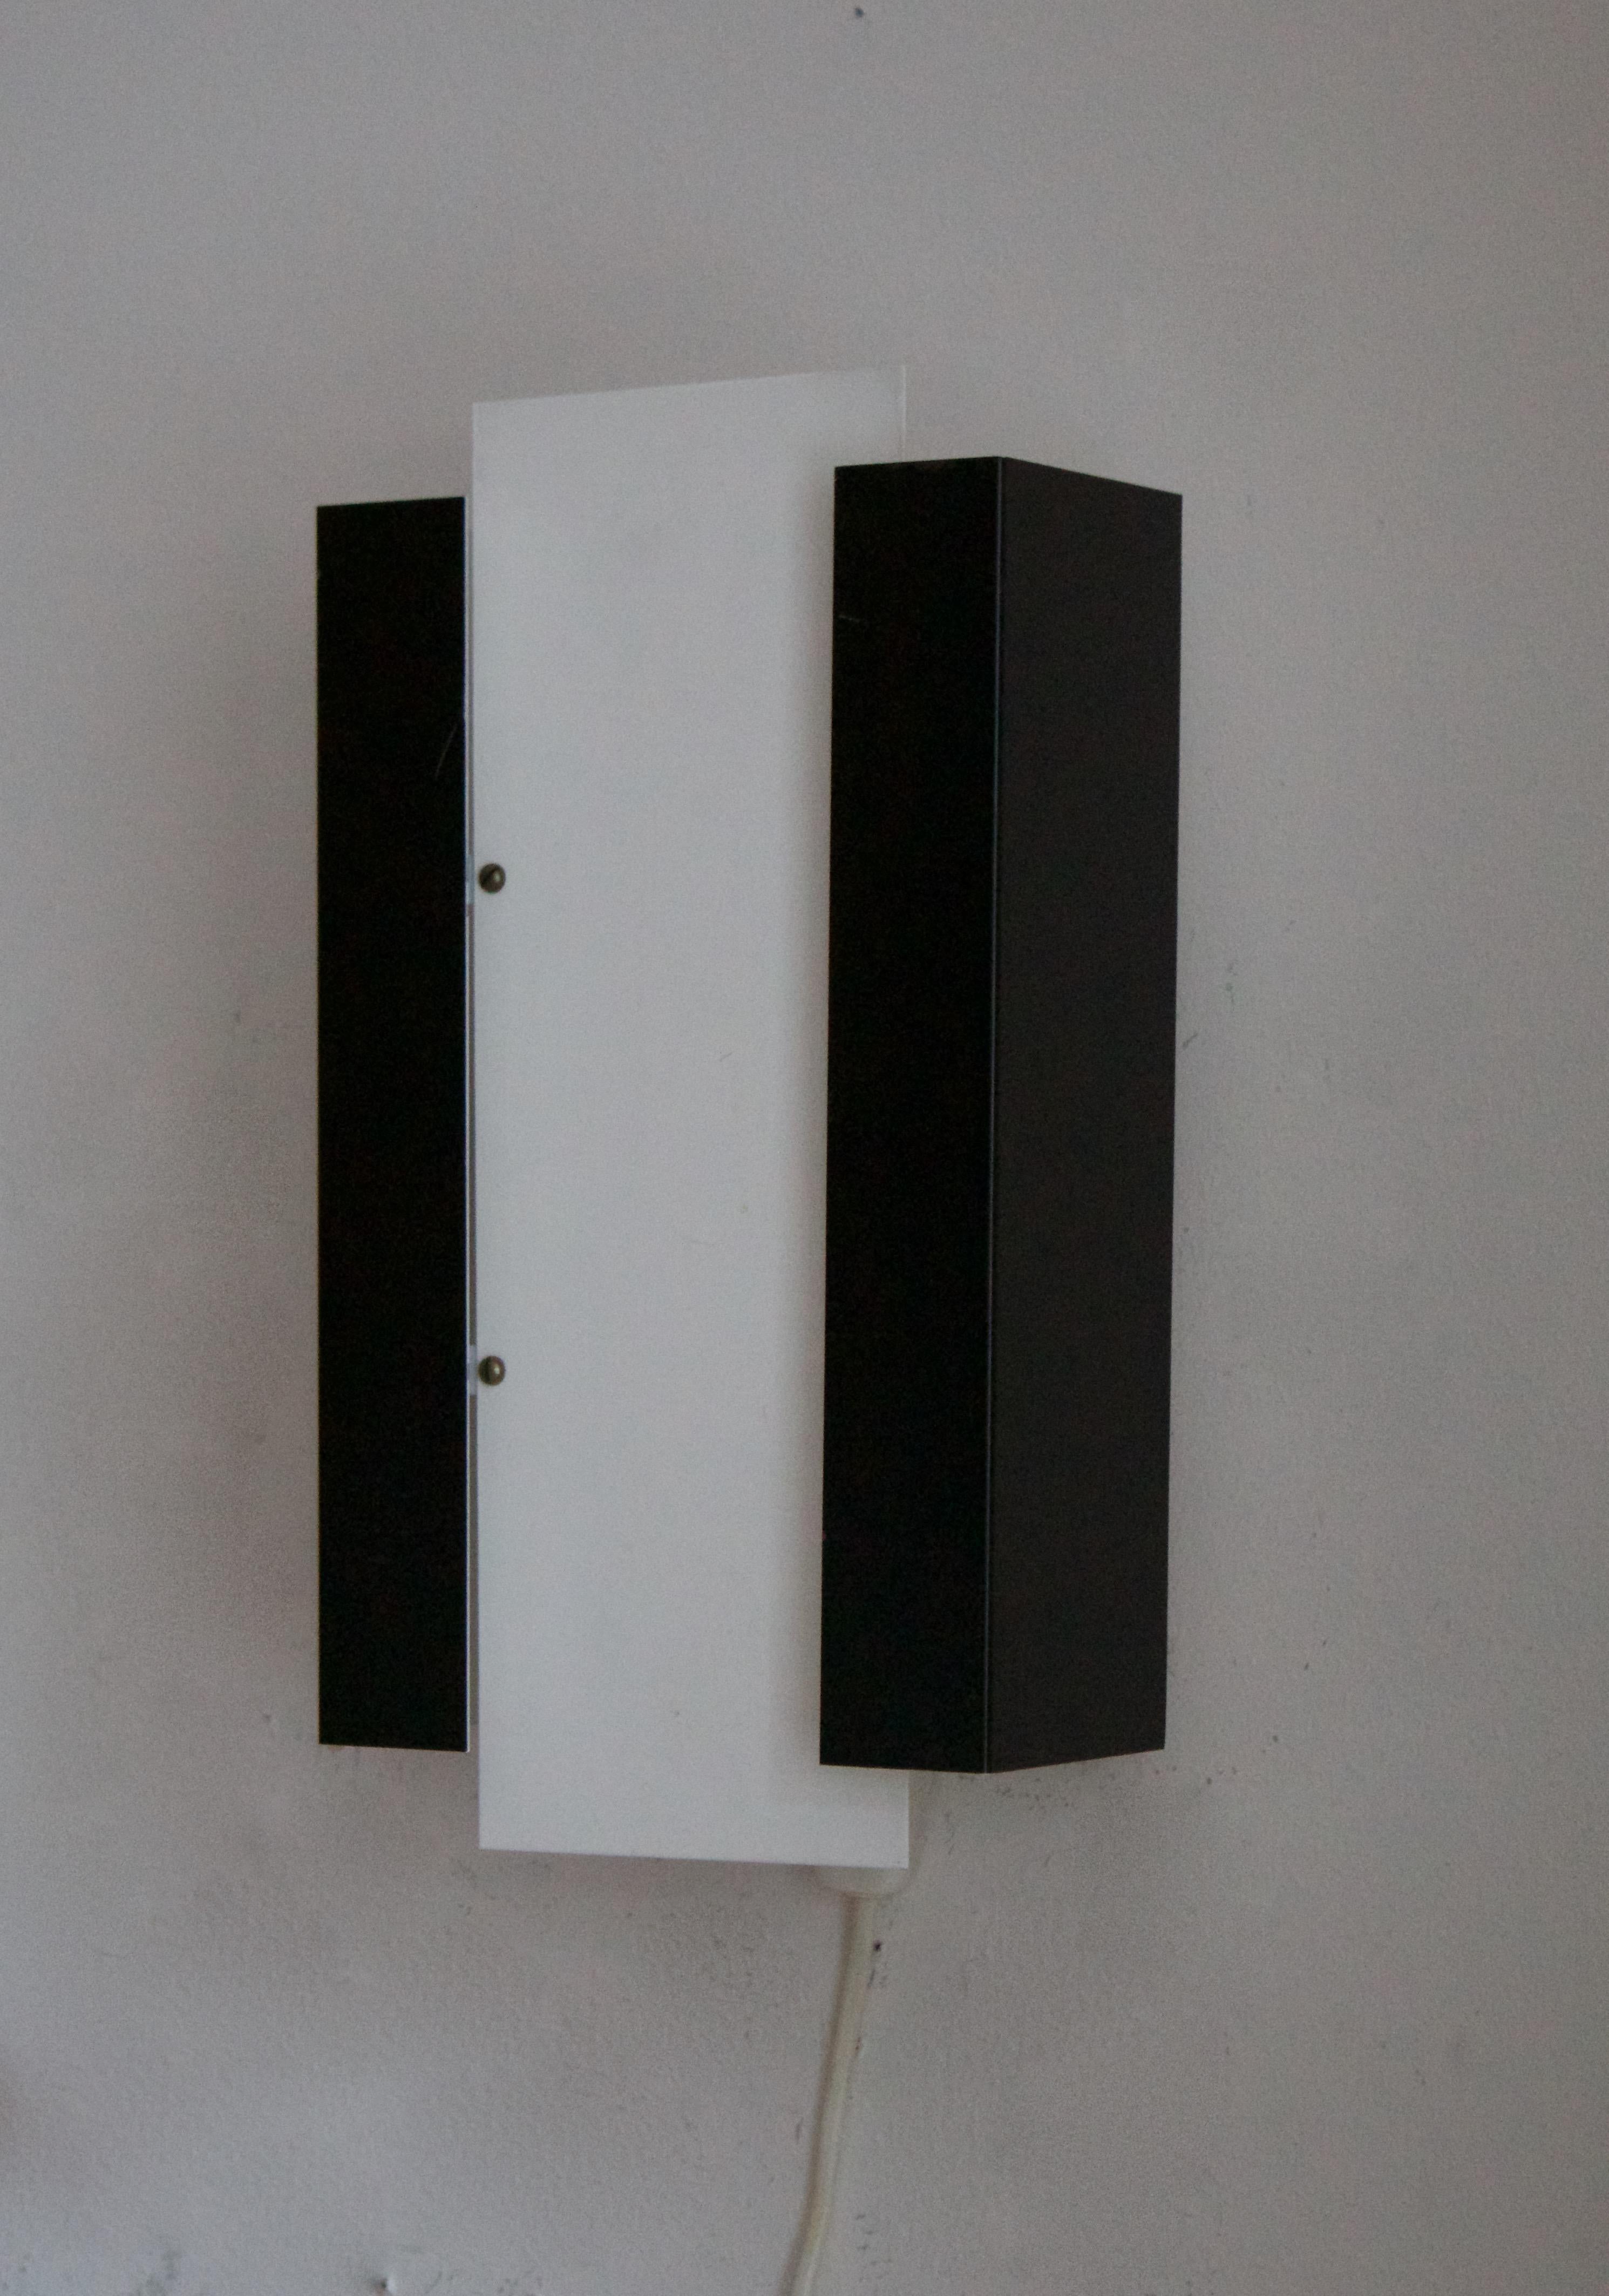 Finnish Itsu, Minimalist Wall Light, Black and White Lacquered Metal, Finland, 1950s For Sale